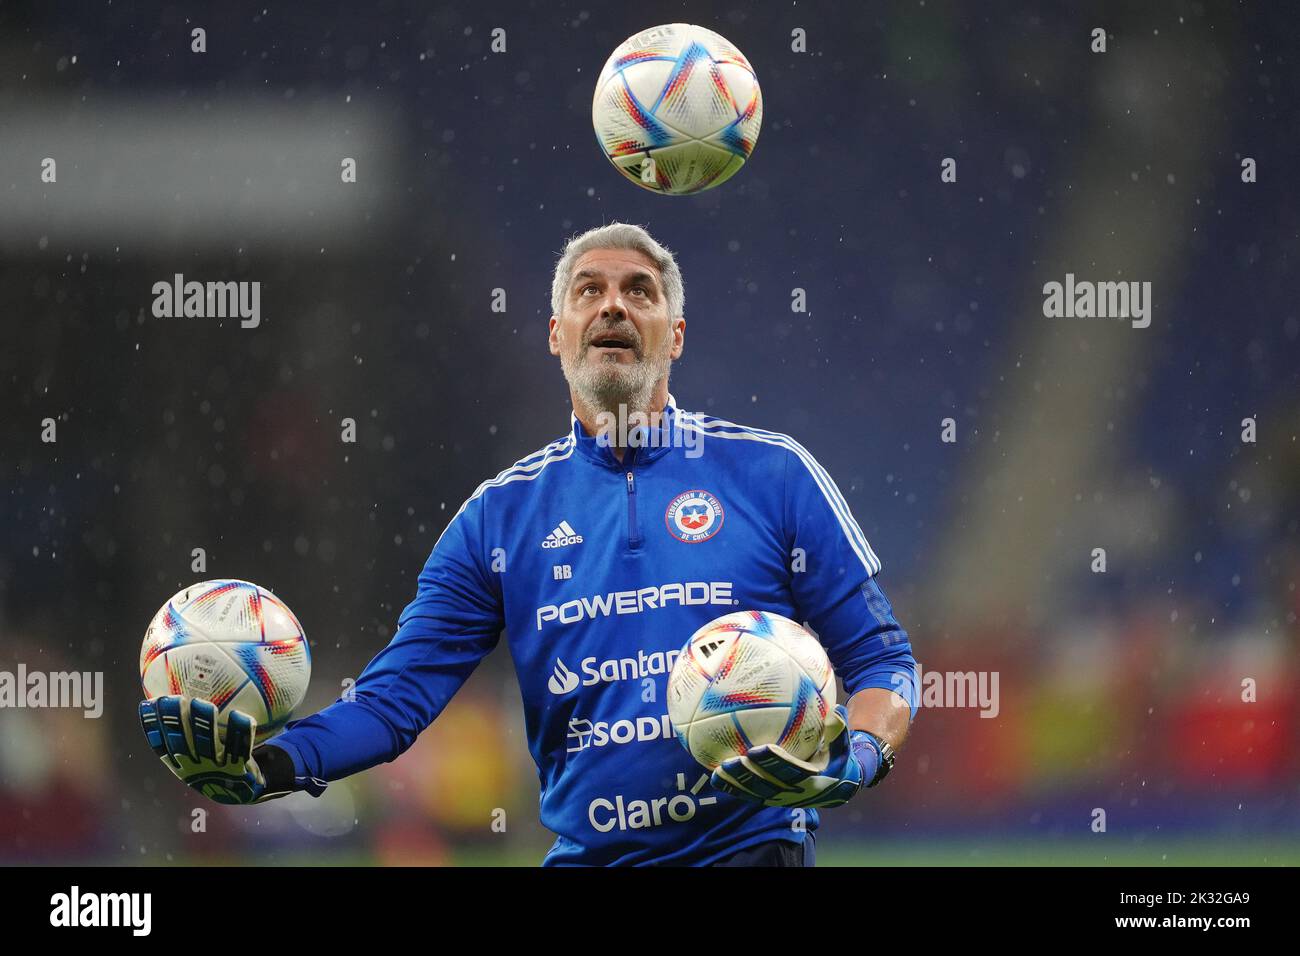 Barcelona, Spain. 23rd Sep, 2022. Chile’s goalkeeper coach Tito Bonano during the international friendly match between Morocco and Chile played at RCDE Stadium on September 23, 2022 in Barcelona, Spain. (Photo by Bagu Blanco / PRESSIN) Credit: PRESSINPHOTO SPORTS AGENCY/Alamy Live News Stock Photo